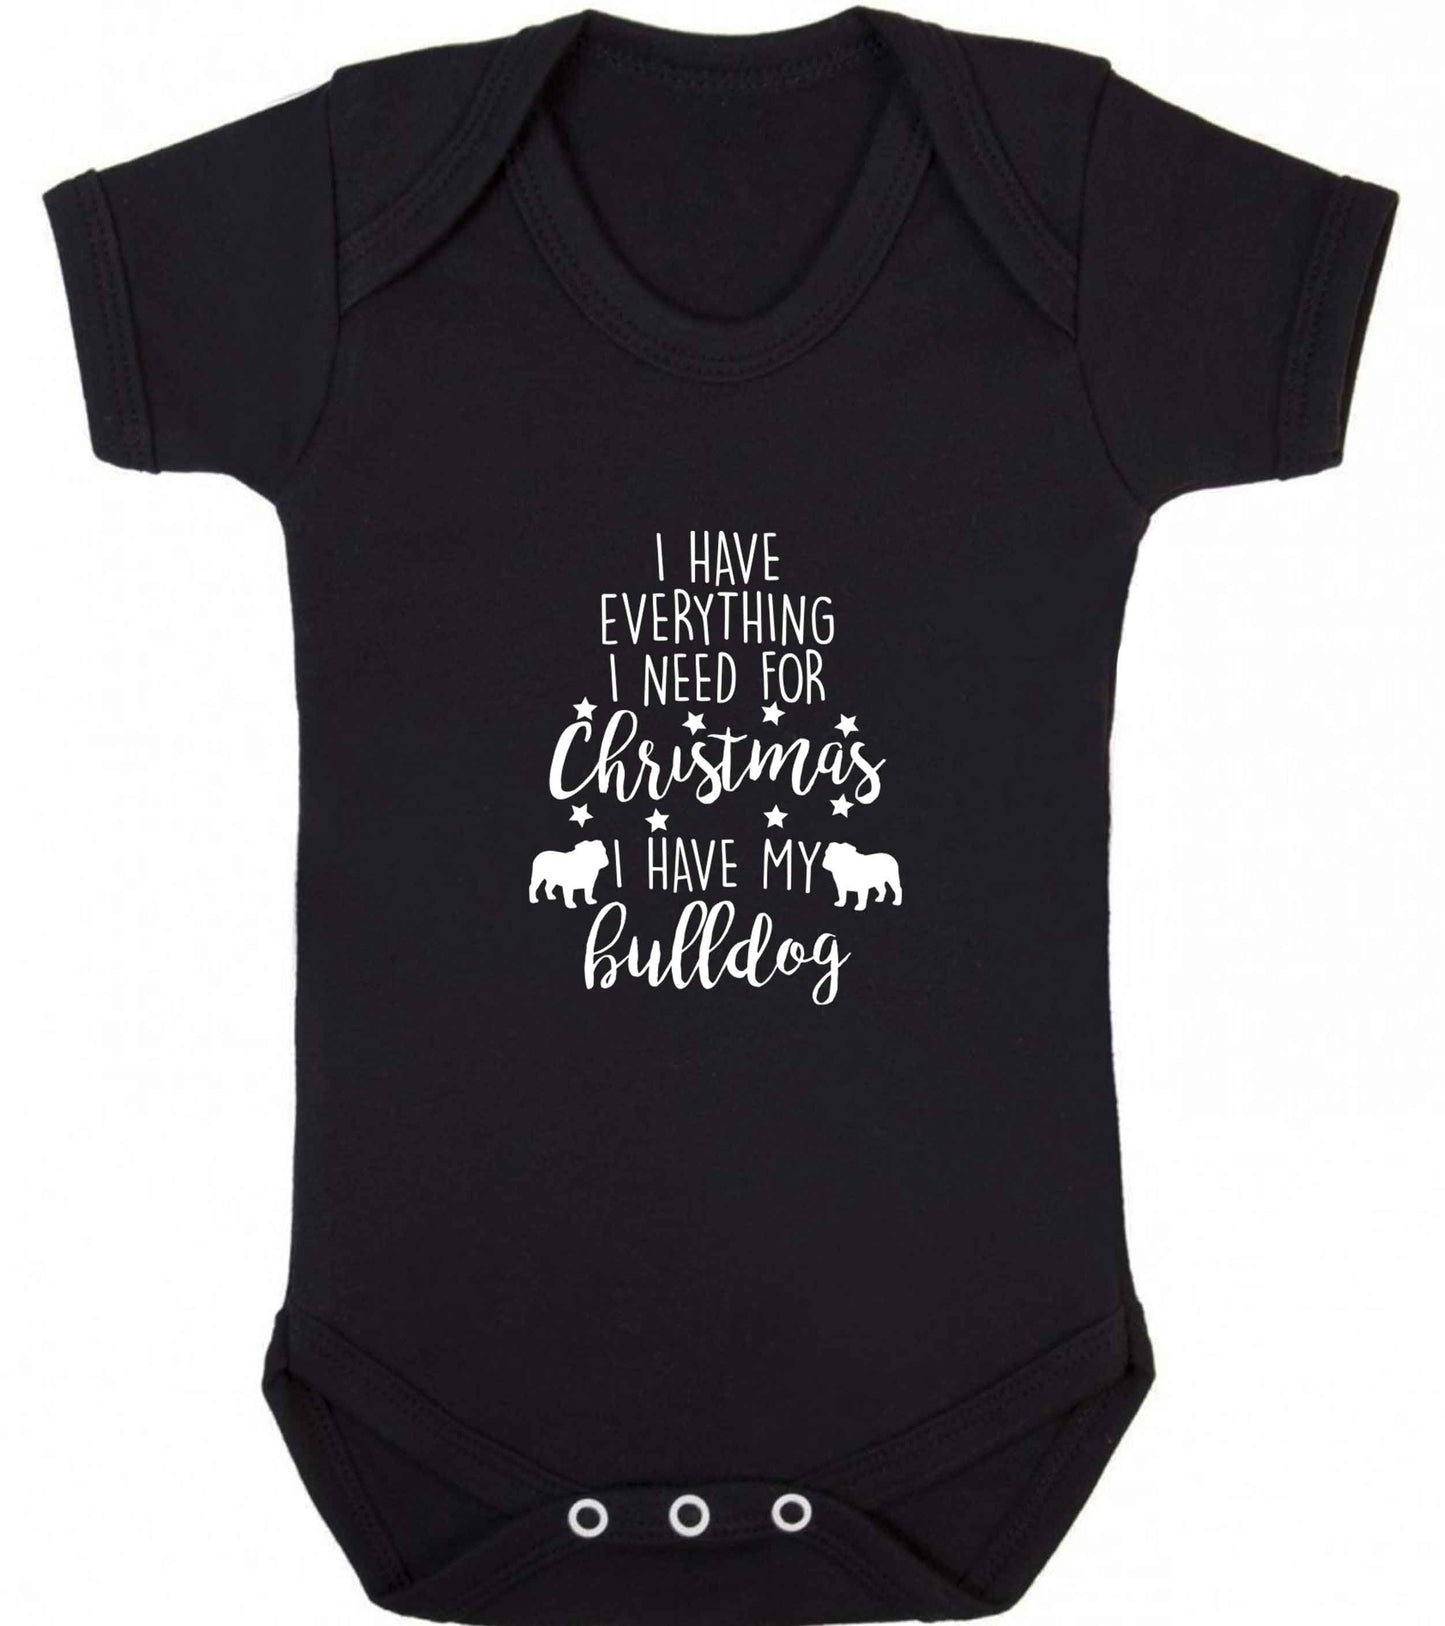 I have everything I need for Christmas I have my bulldog baby vest black 18-24 months